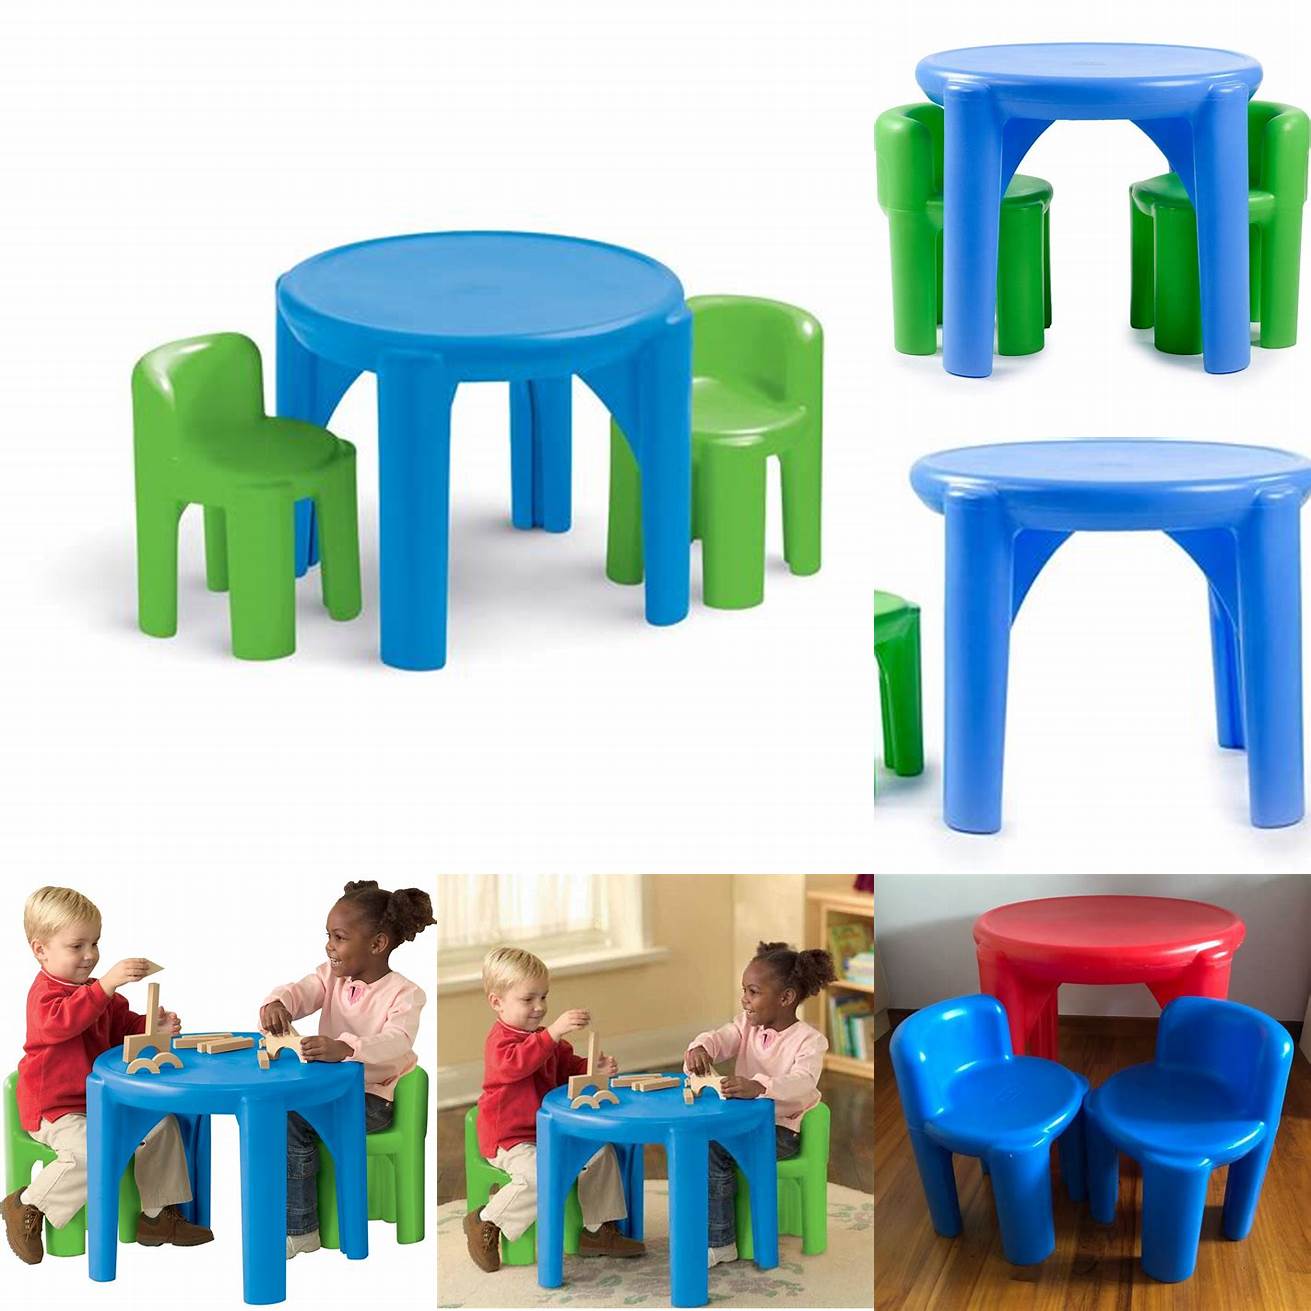 The Little Tikes Bright n Bold Table Chairs is a great option for kids who need a place to eat play or do crafts Its made from durable plastic and comes in bright colors that kids love